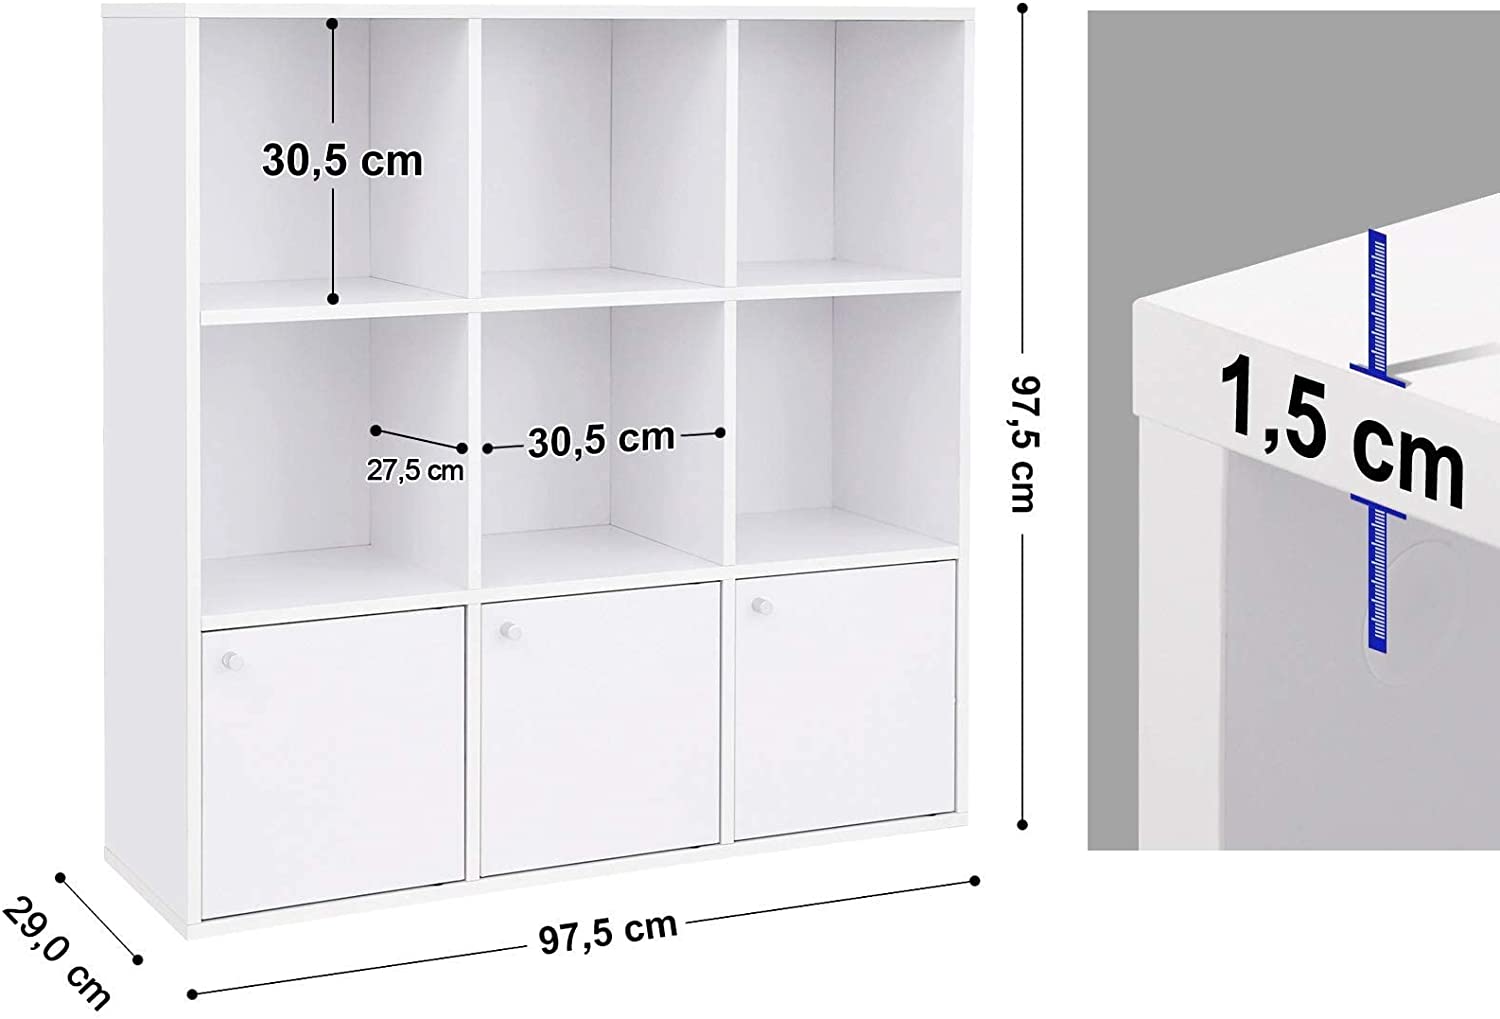 Wooden Storage Bookcase, Home or Office Display Shelf, Freestanding Cube Unit DVD Rack Bookshelf with 3 Bottom Cabinets, White, LBC33WT RAW58.dk 